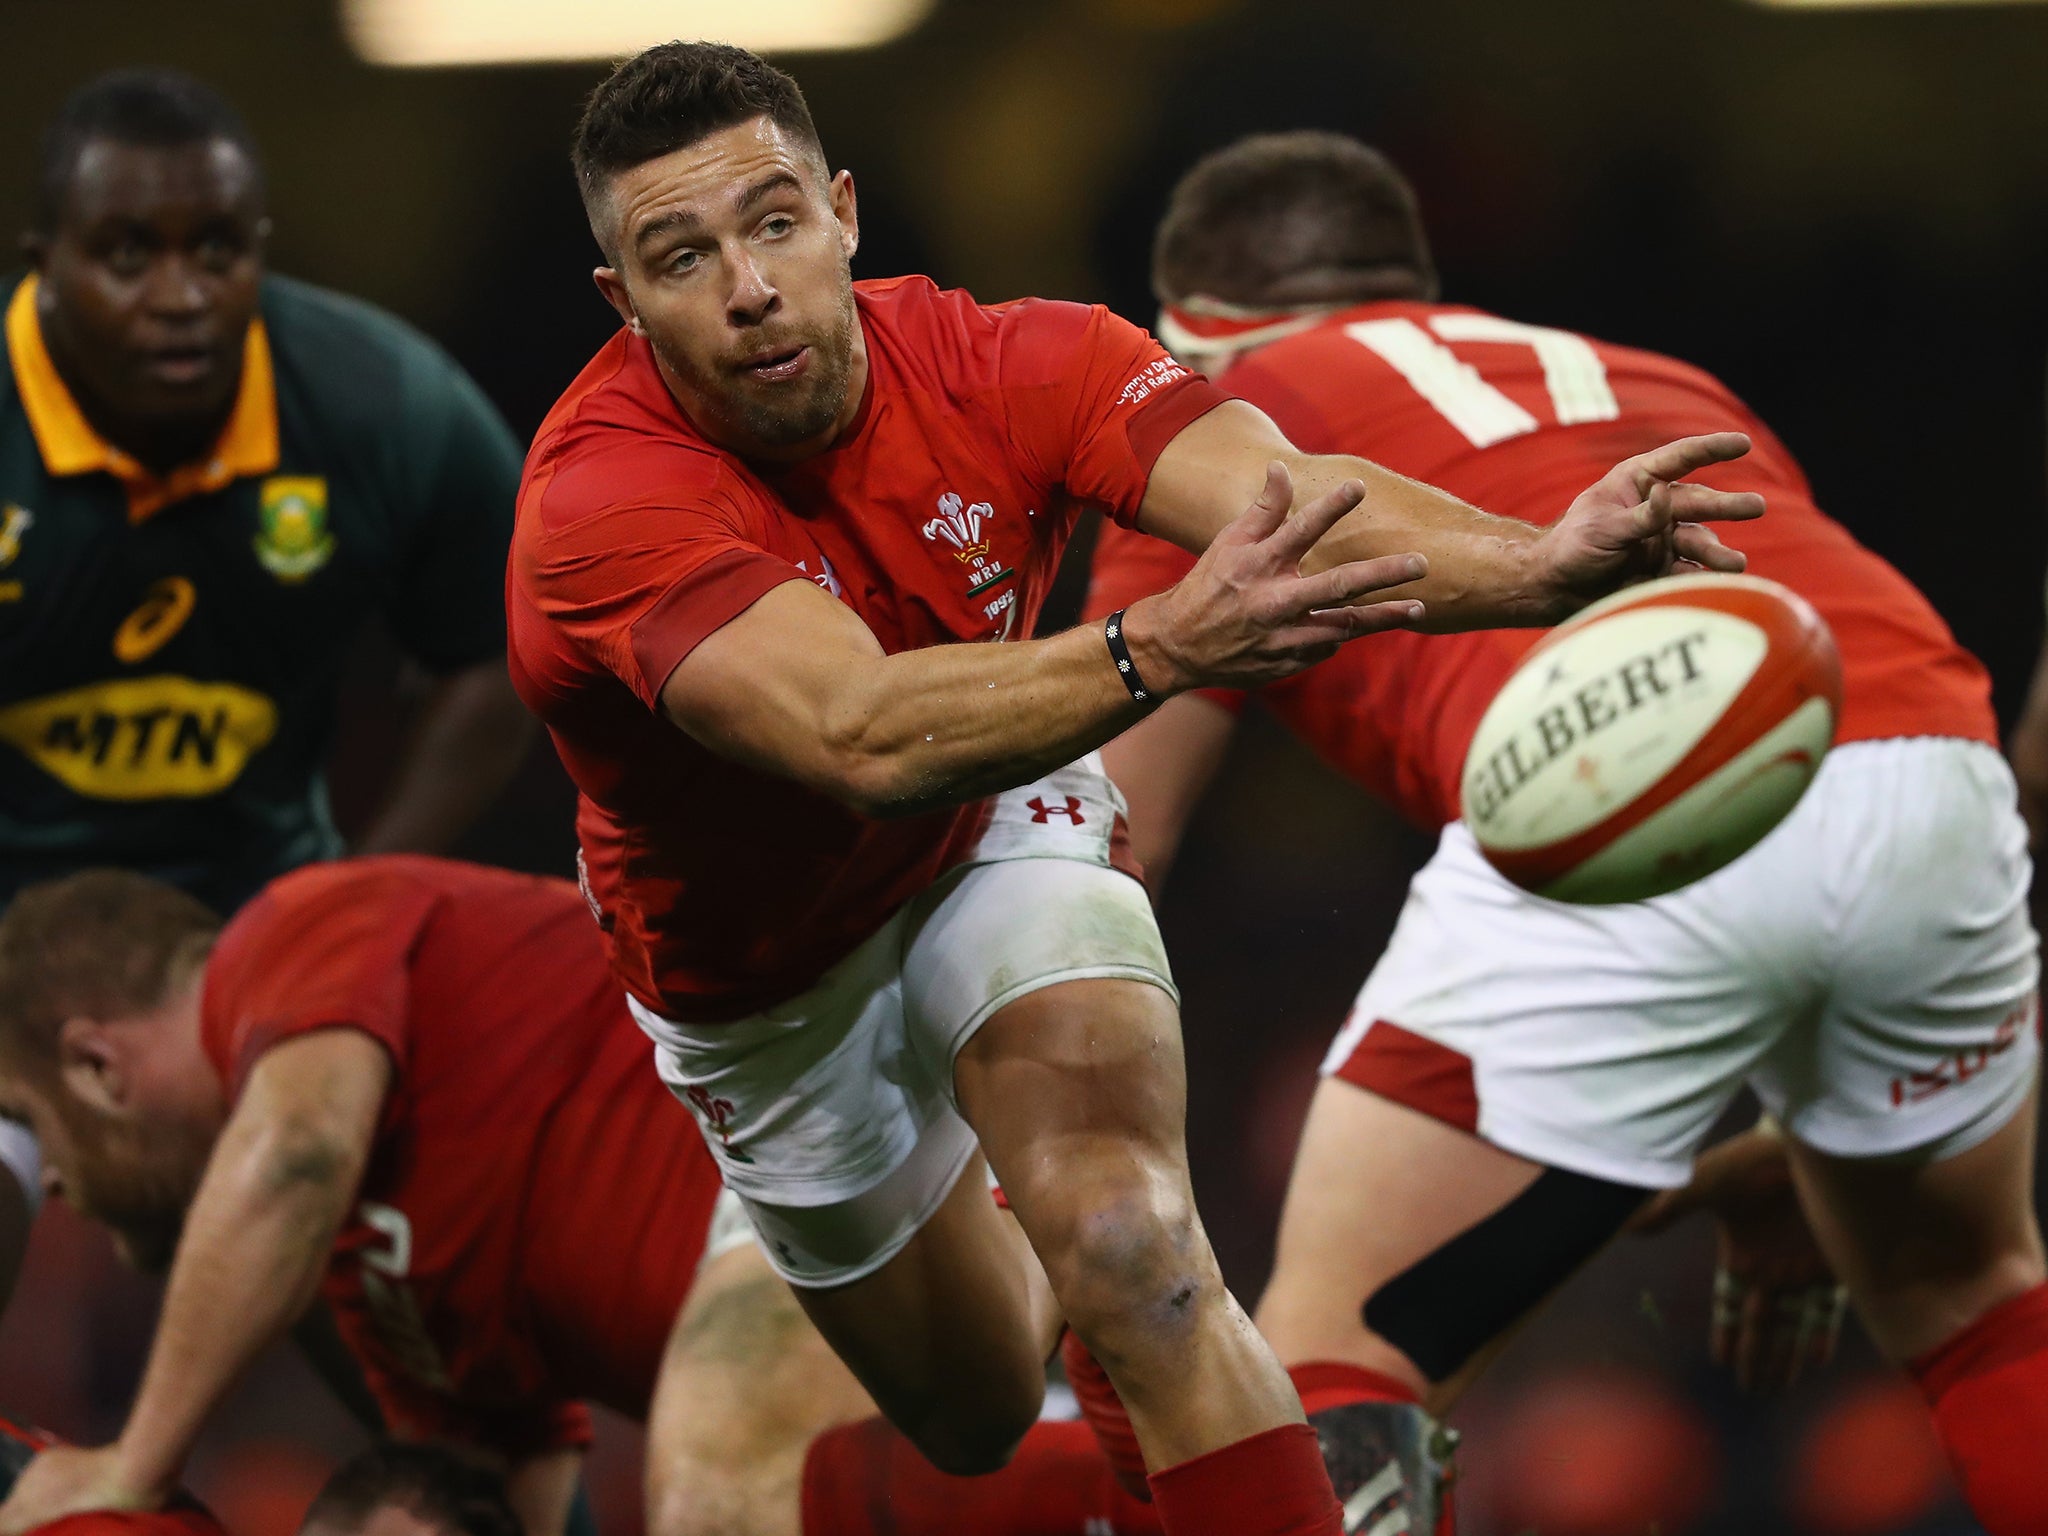 Webb is unlikely to play for Wales again due to his summer move to Toulon